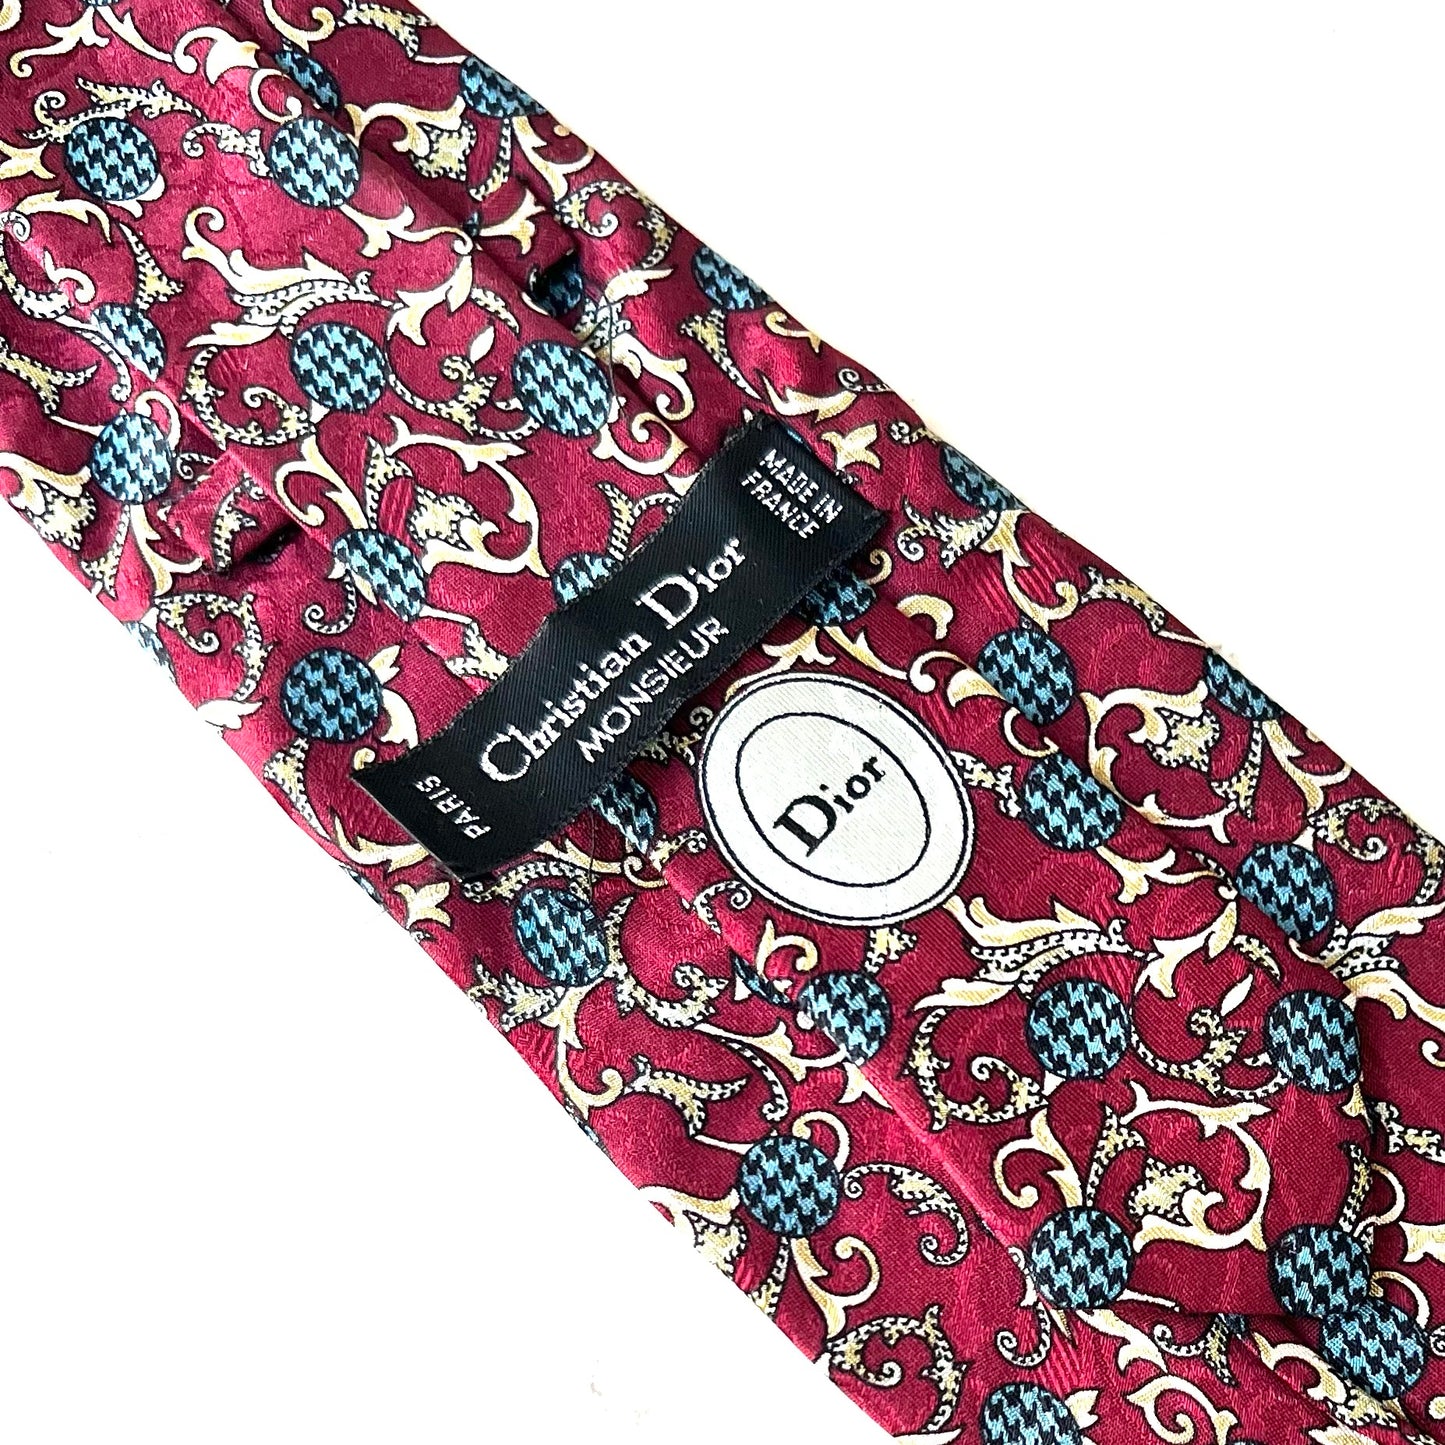 1980's Christian Dior Monsieur Burgundy Acanthus and Houndstooth Motif Pure Silk Tie